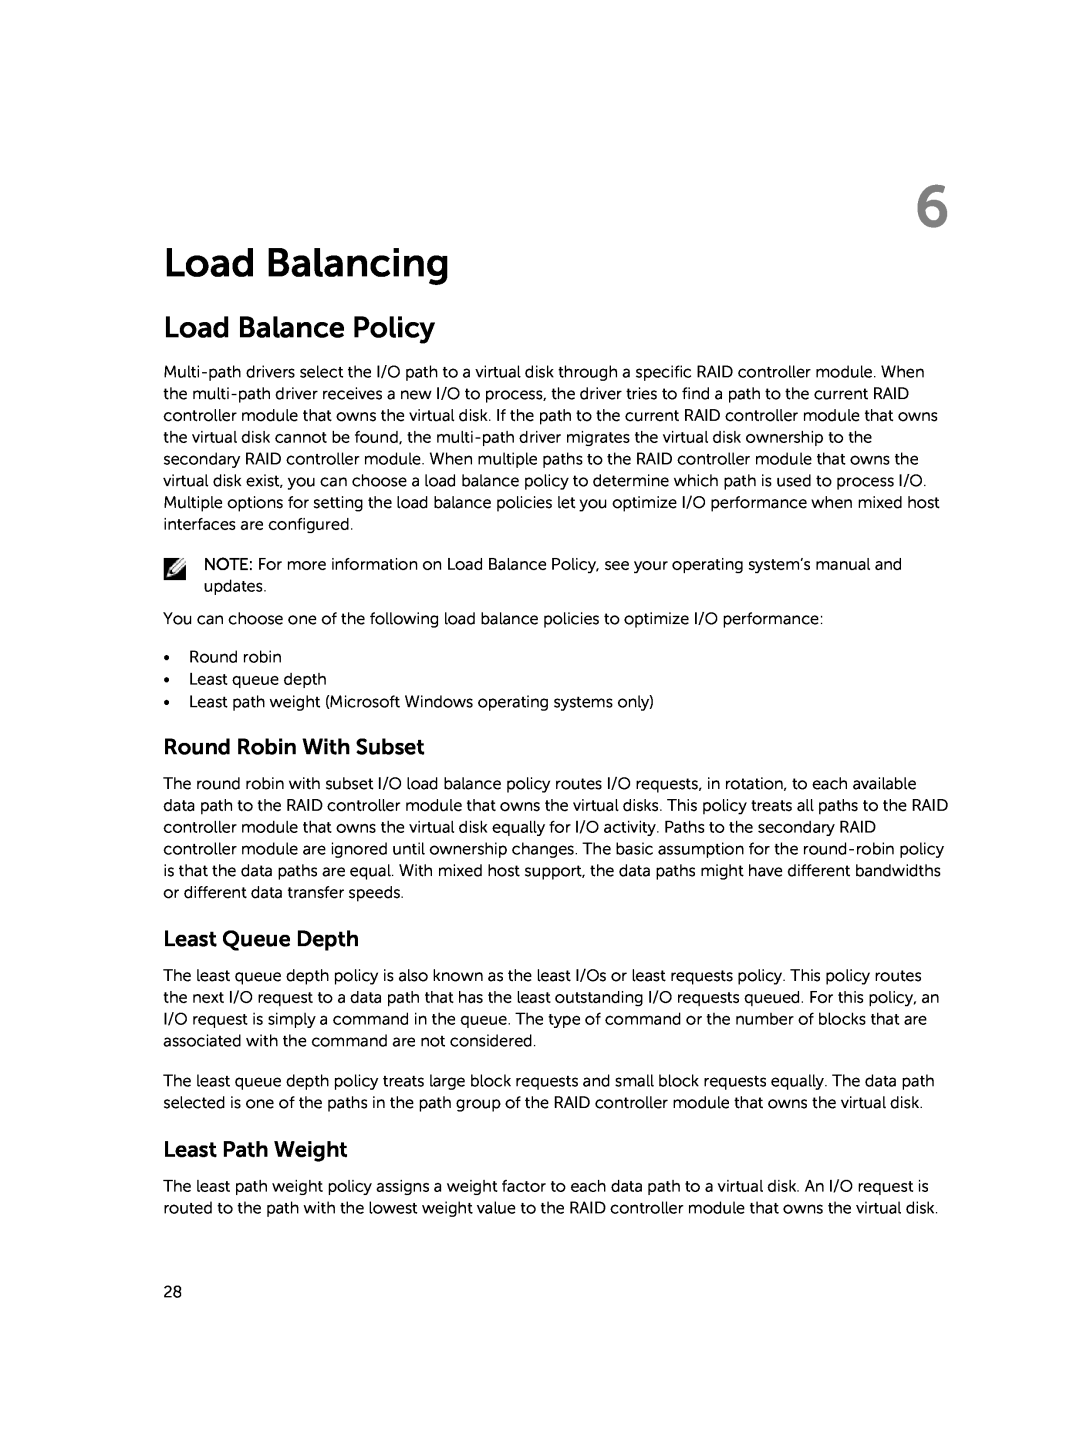 Dell MD3820f, MD3800f Load Balancing, Load Balance Policy, Round Robin With Subset, Least Queue Depth, Least Path Weight 